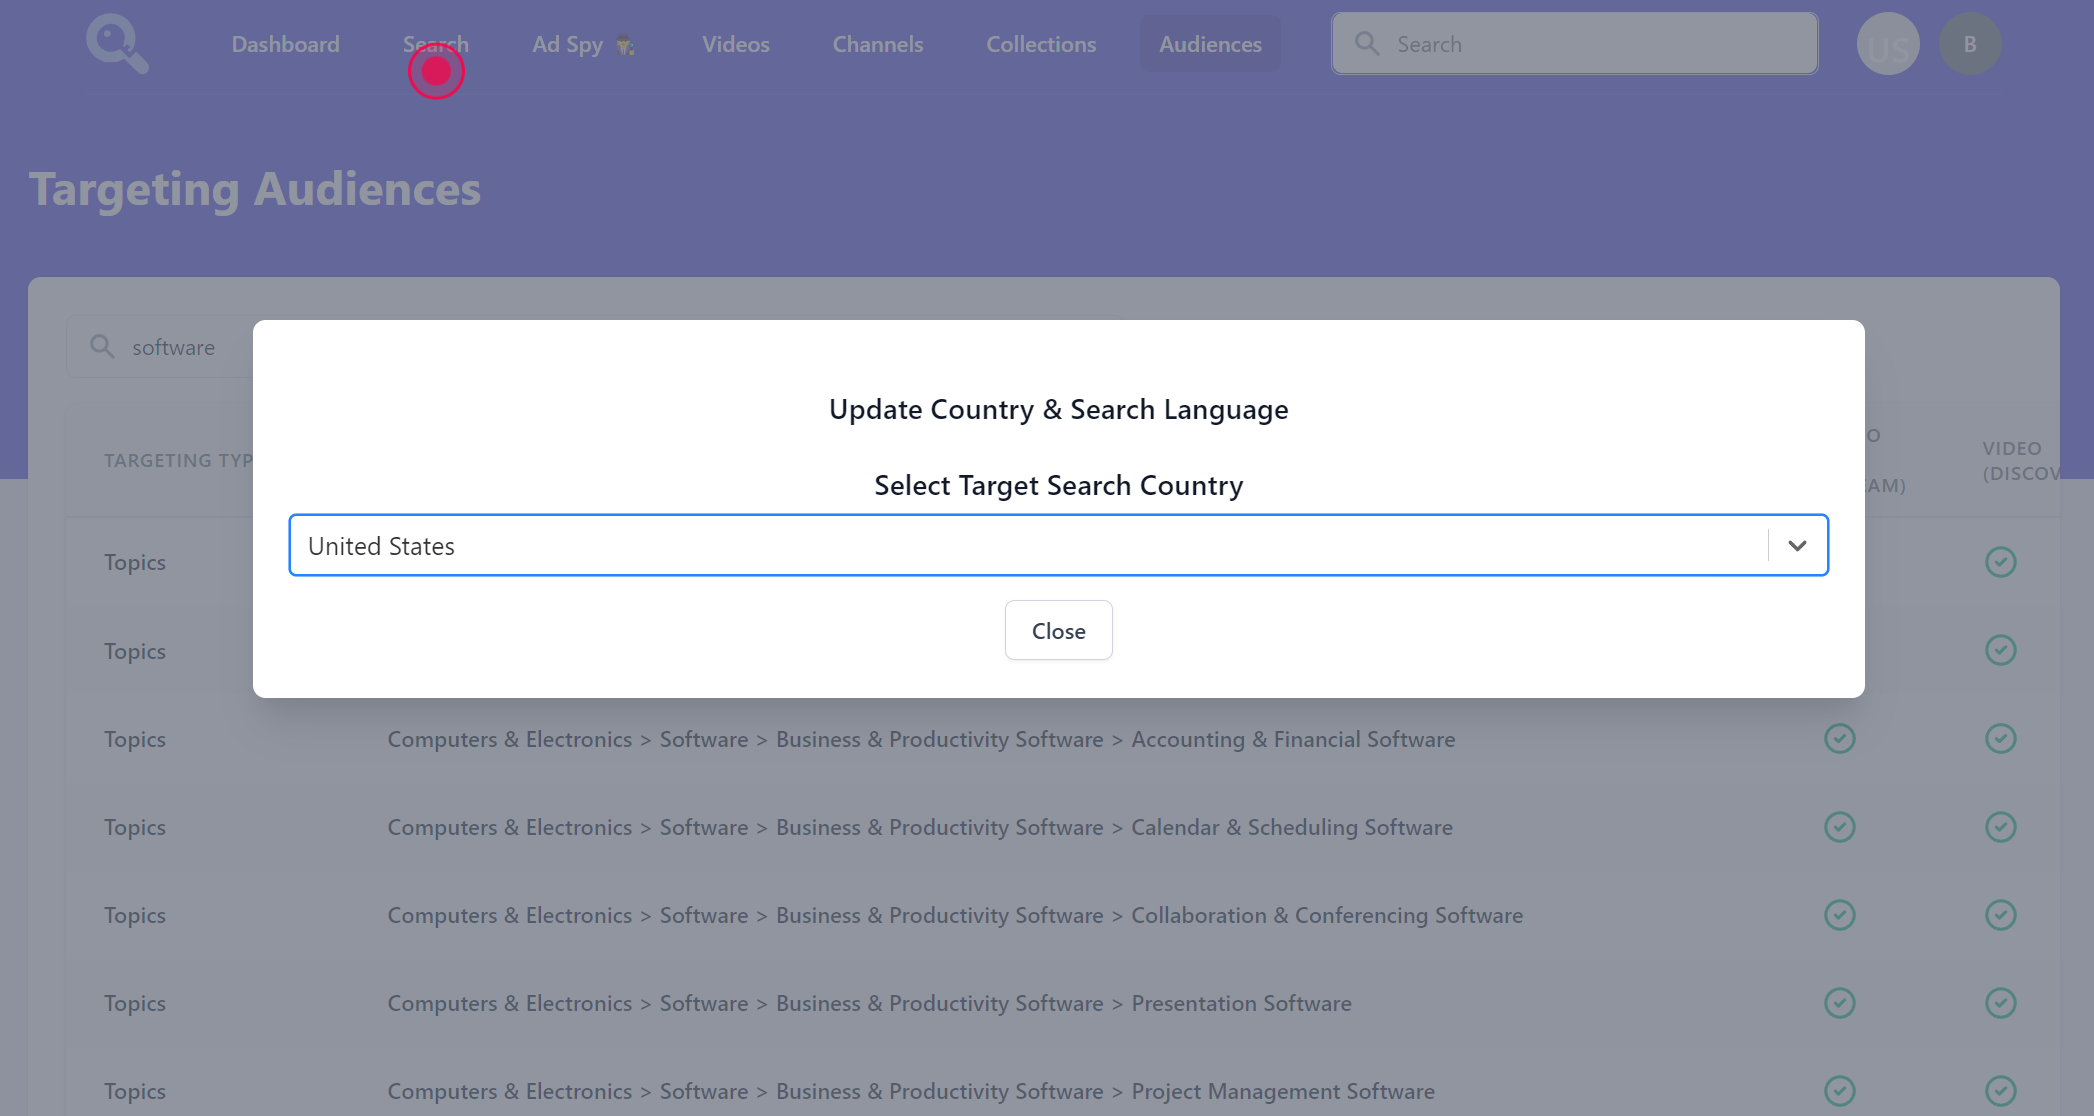 KeywordSearch - Country and Language settings